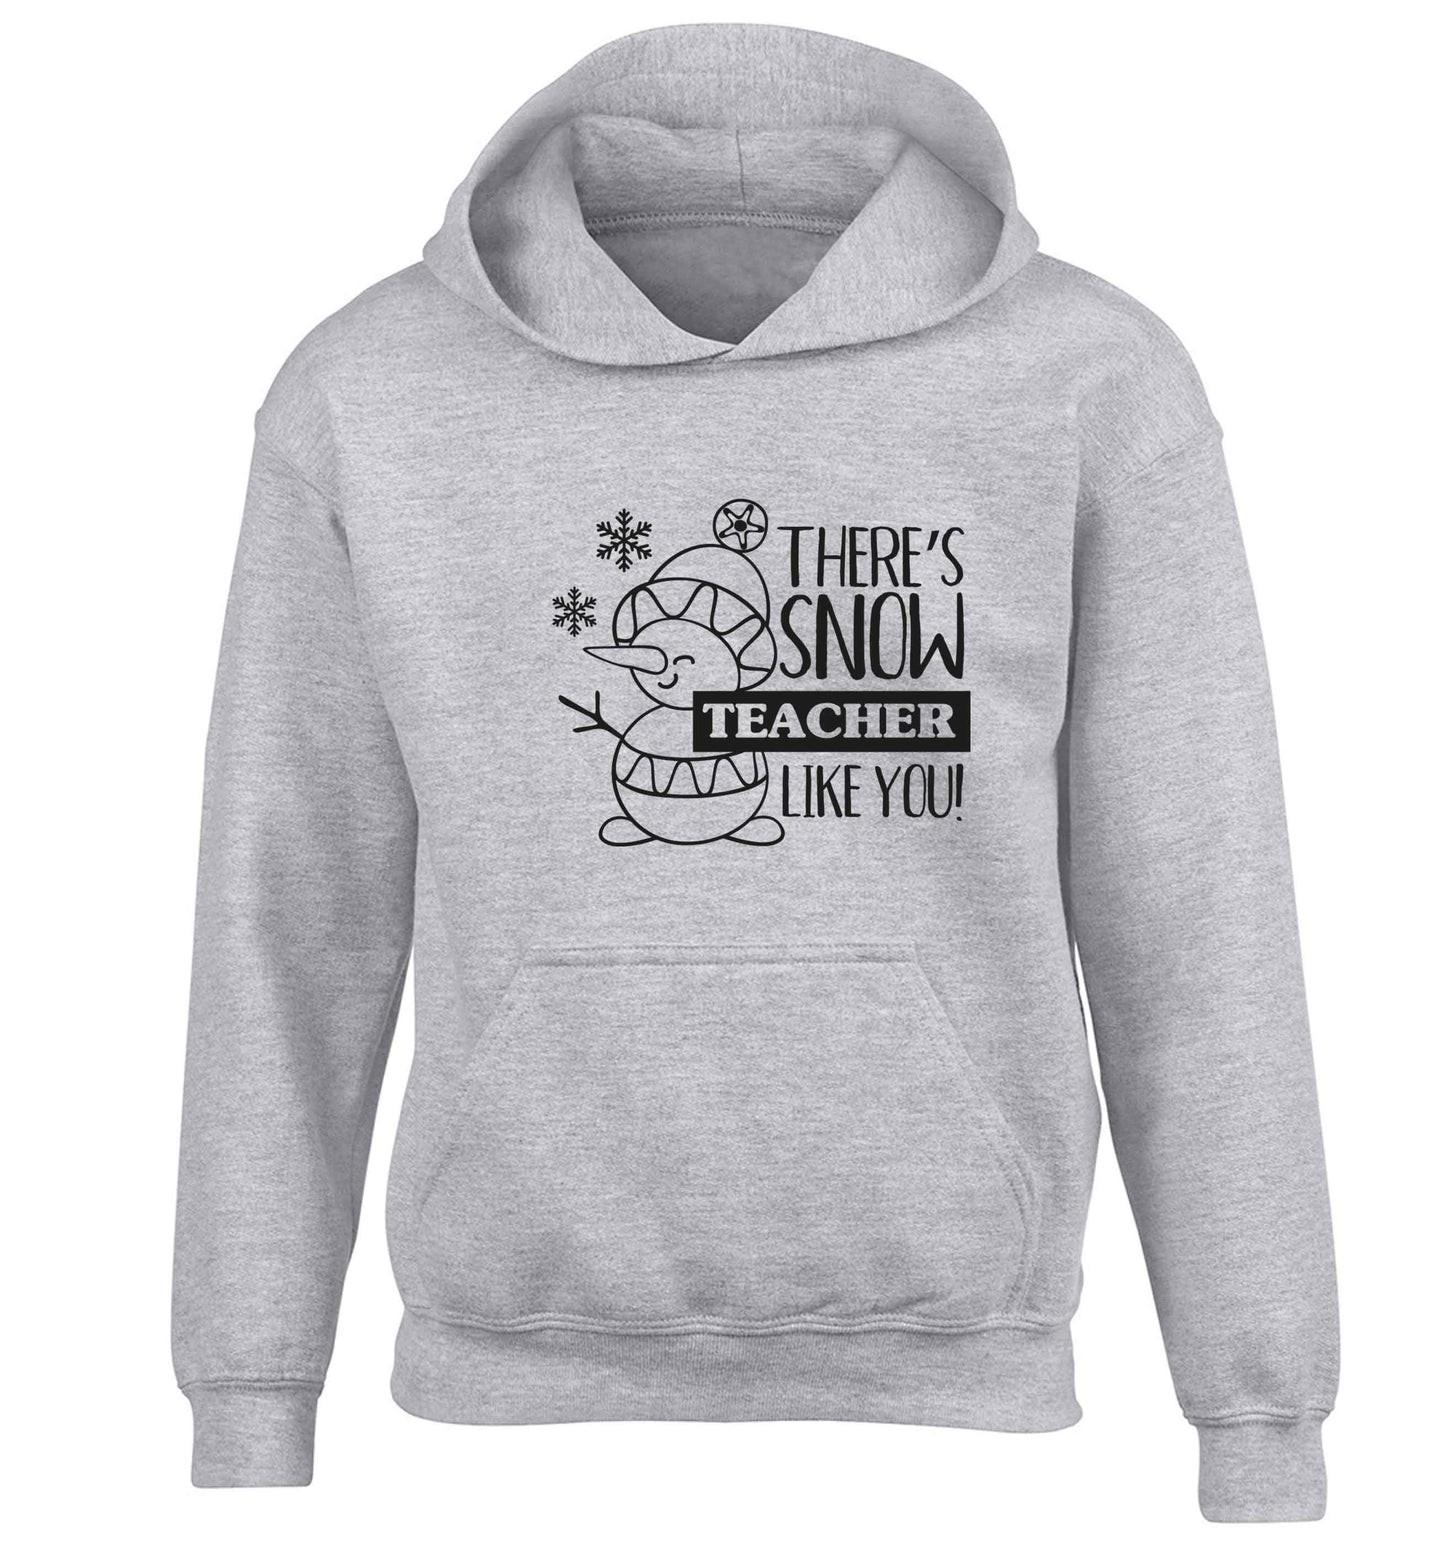 There's snow teacher like you children's grey hoodie 12-13 Years